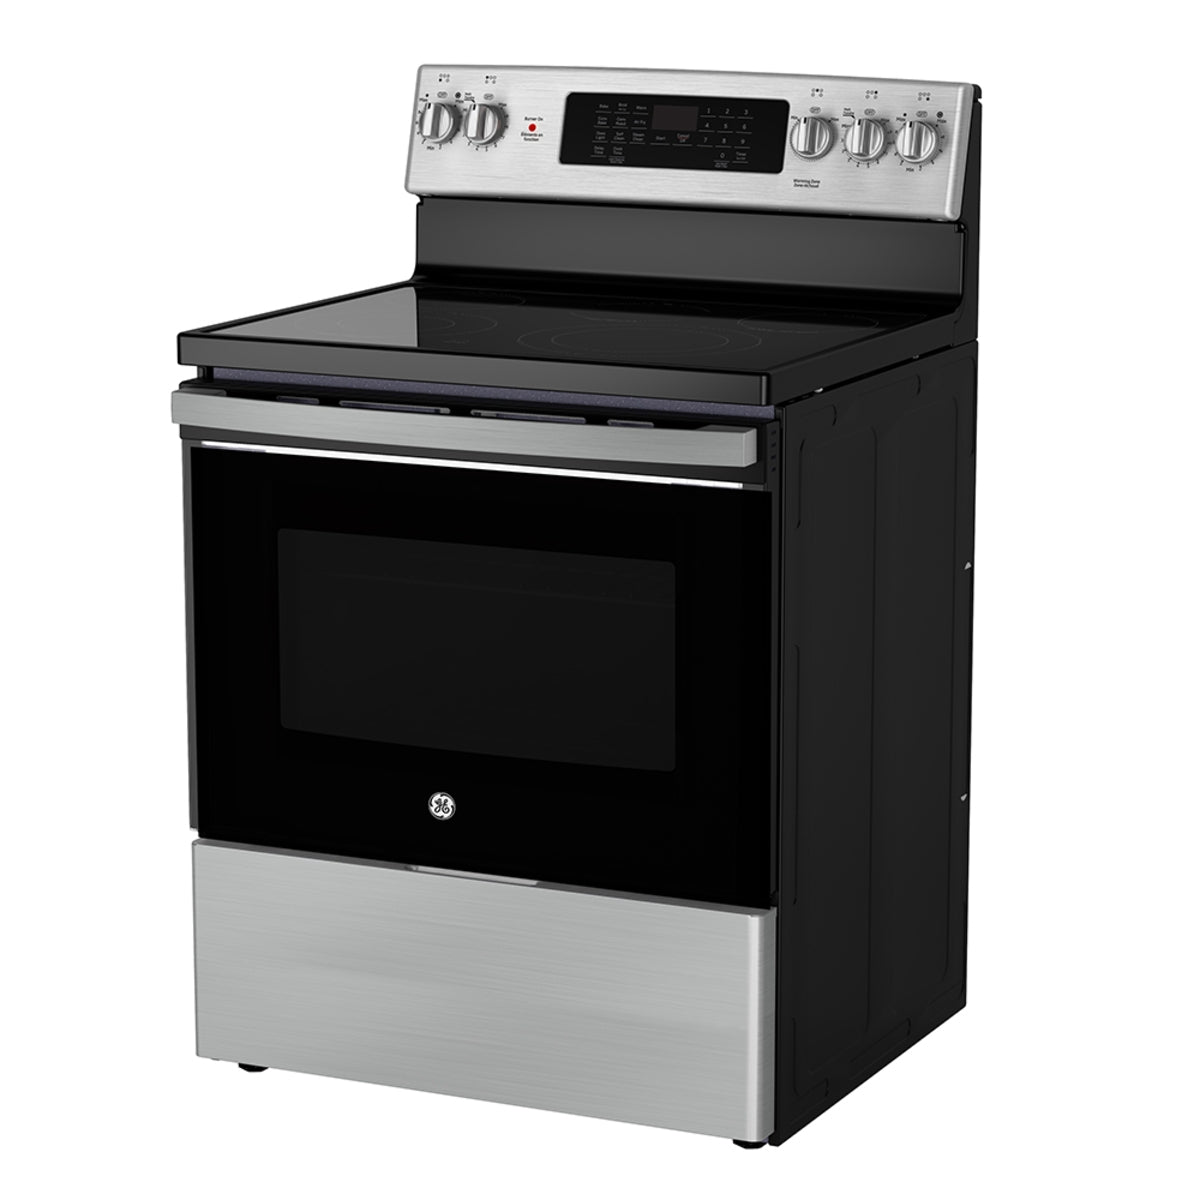 GE - 5 cu. ft  Electric Range in Stainless - JCB840STSS